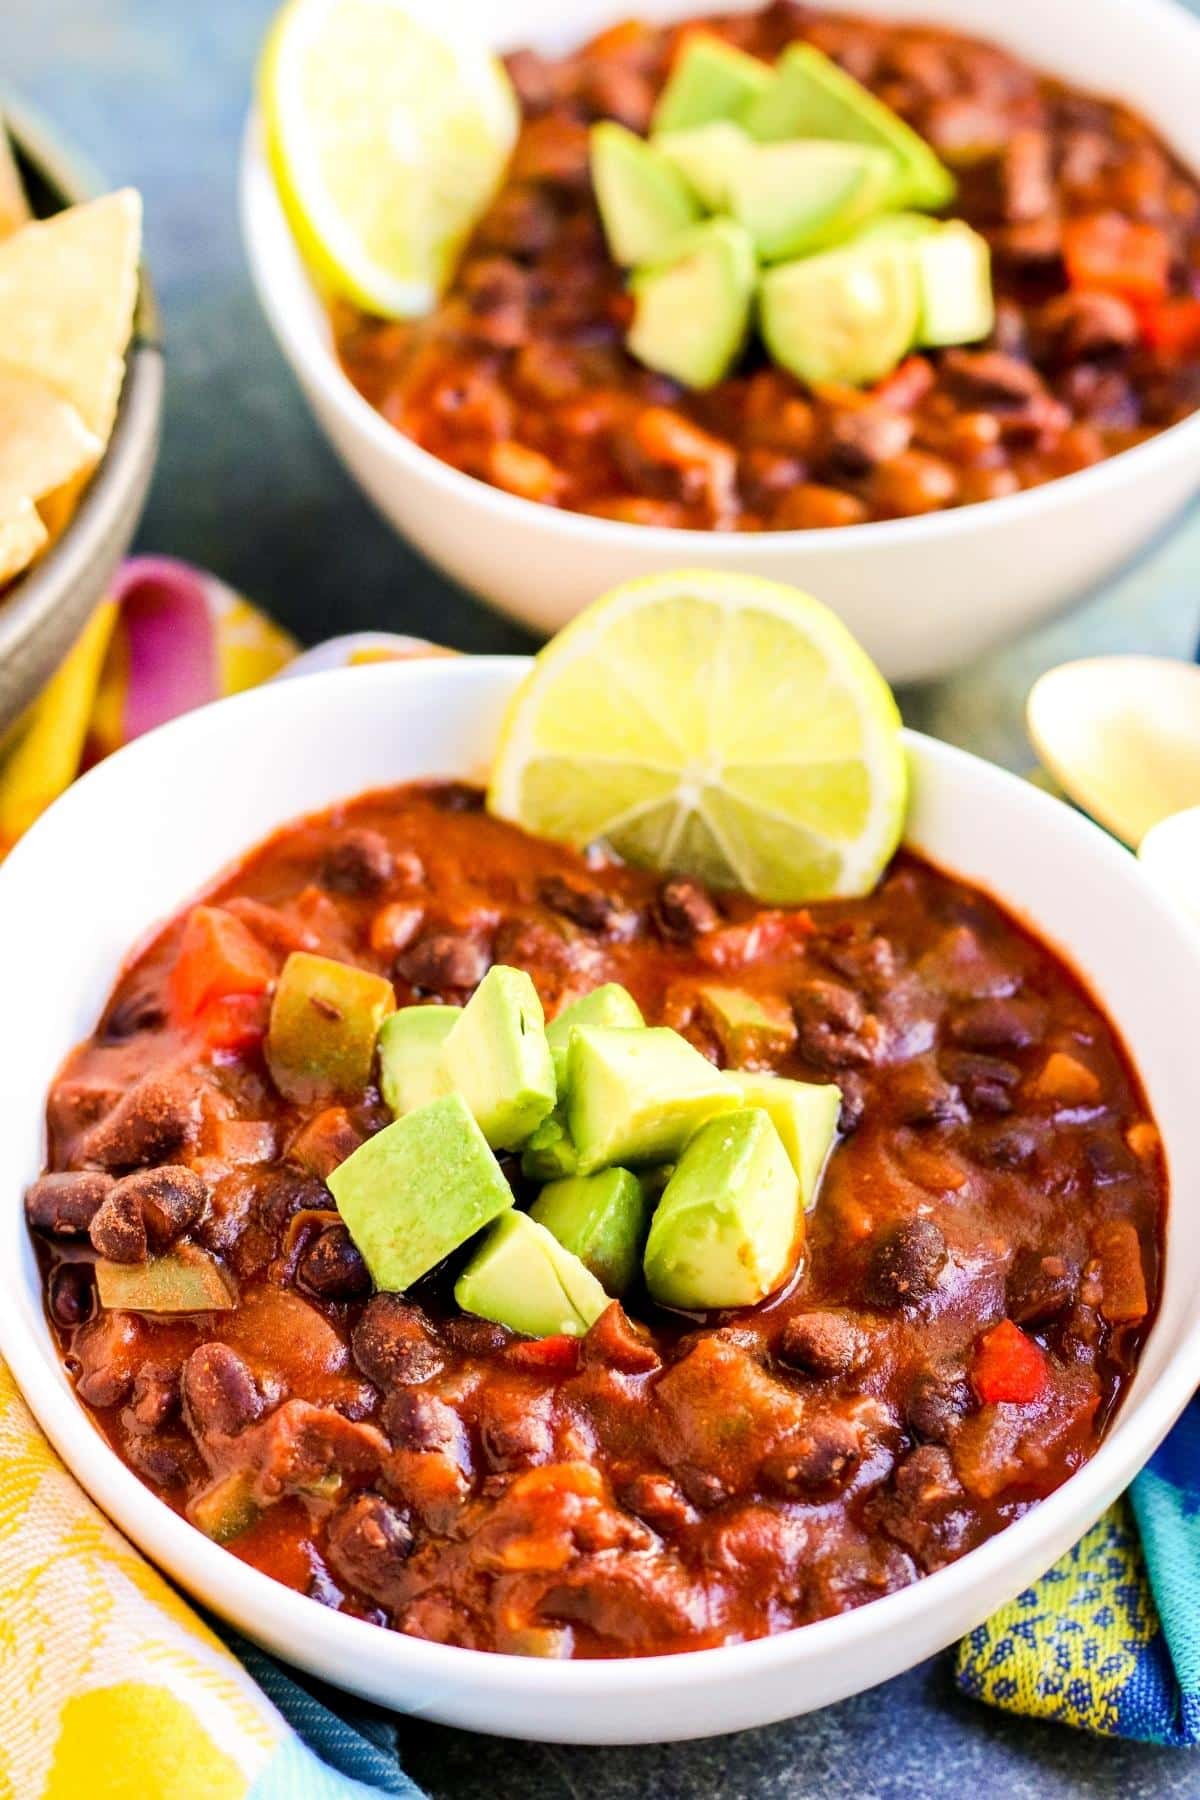 Two bowls of chili topped with avocado and garnishes with slices of lime.